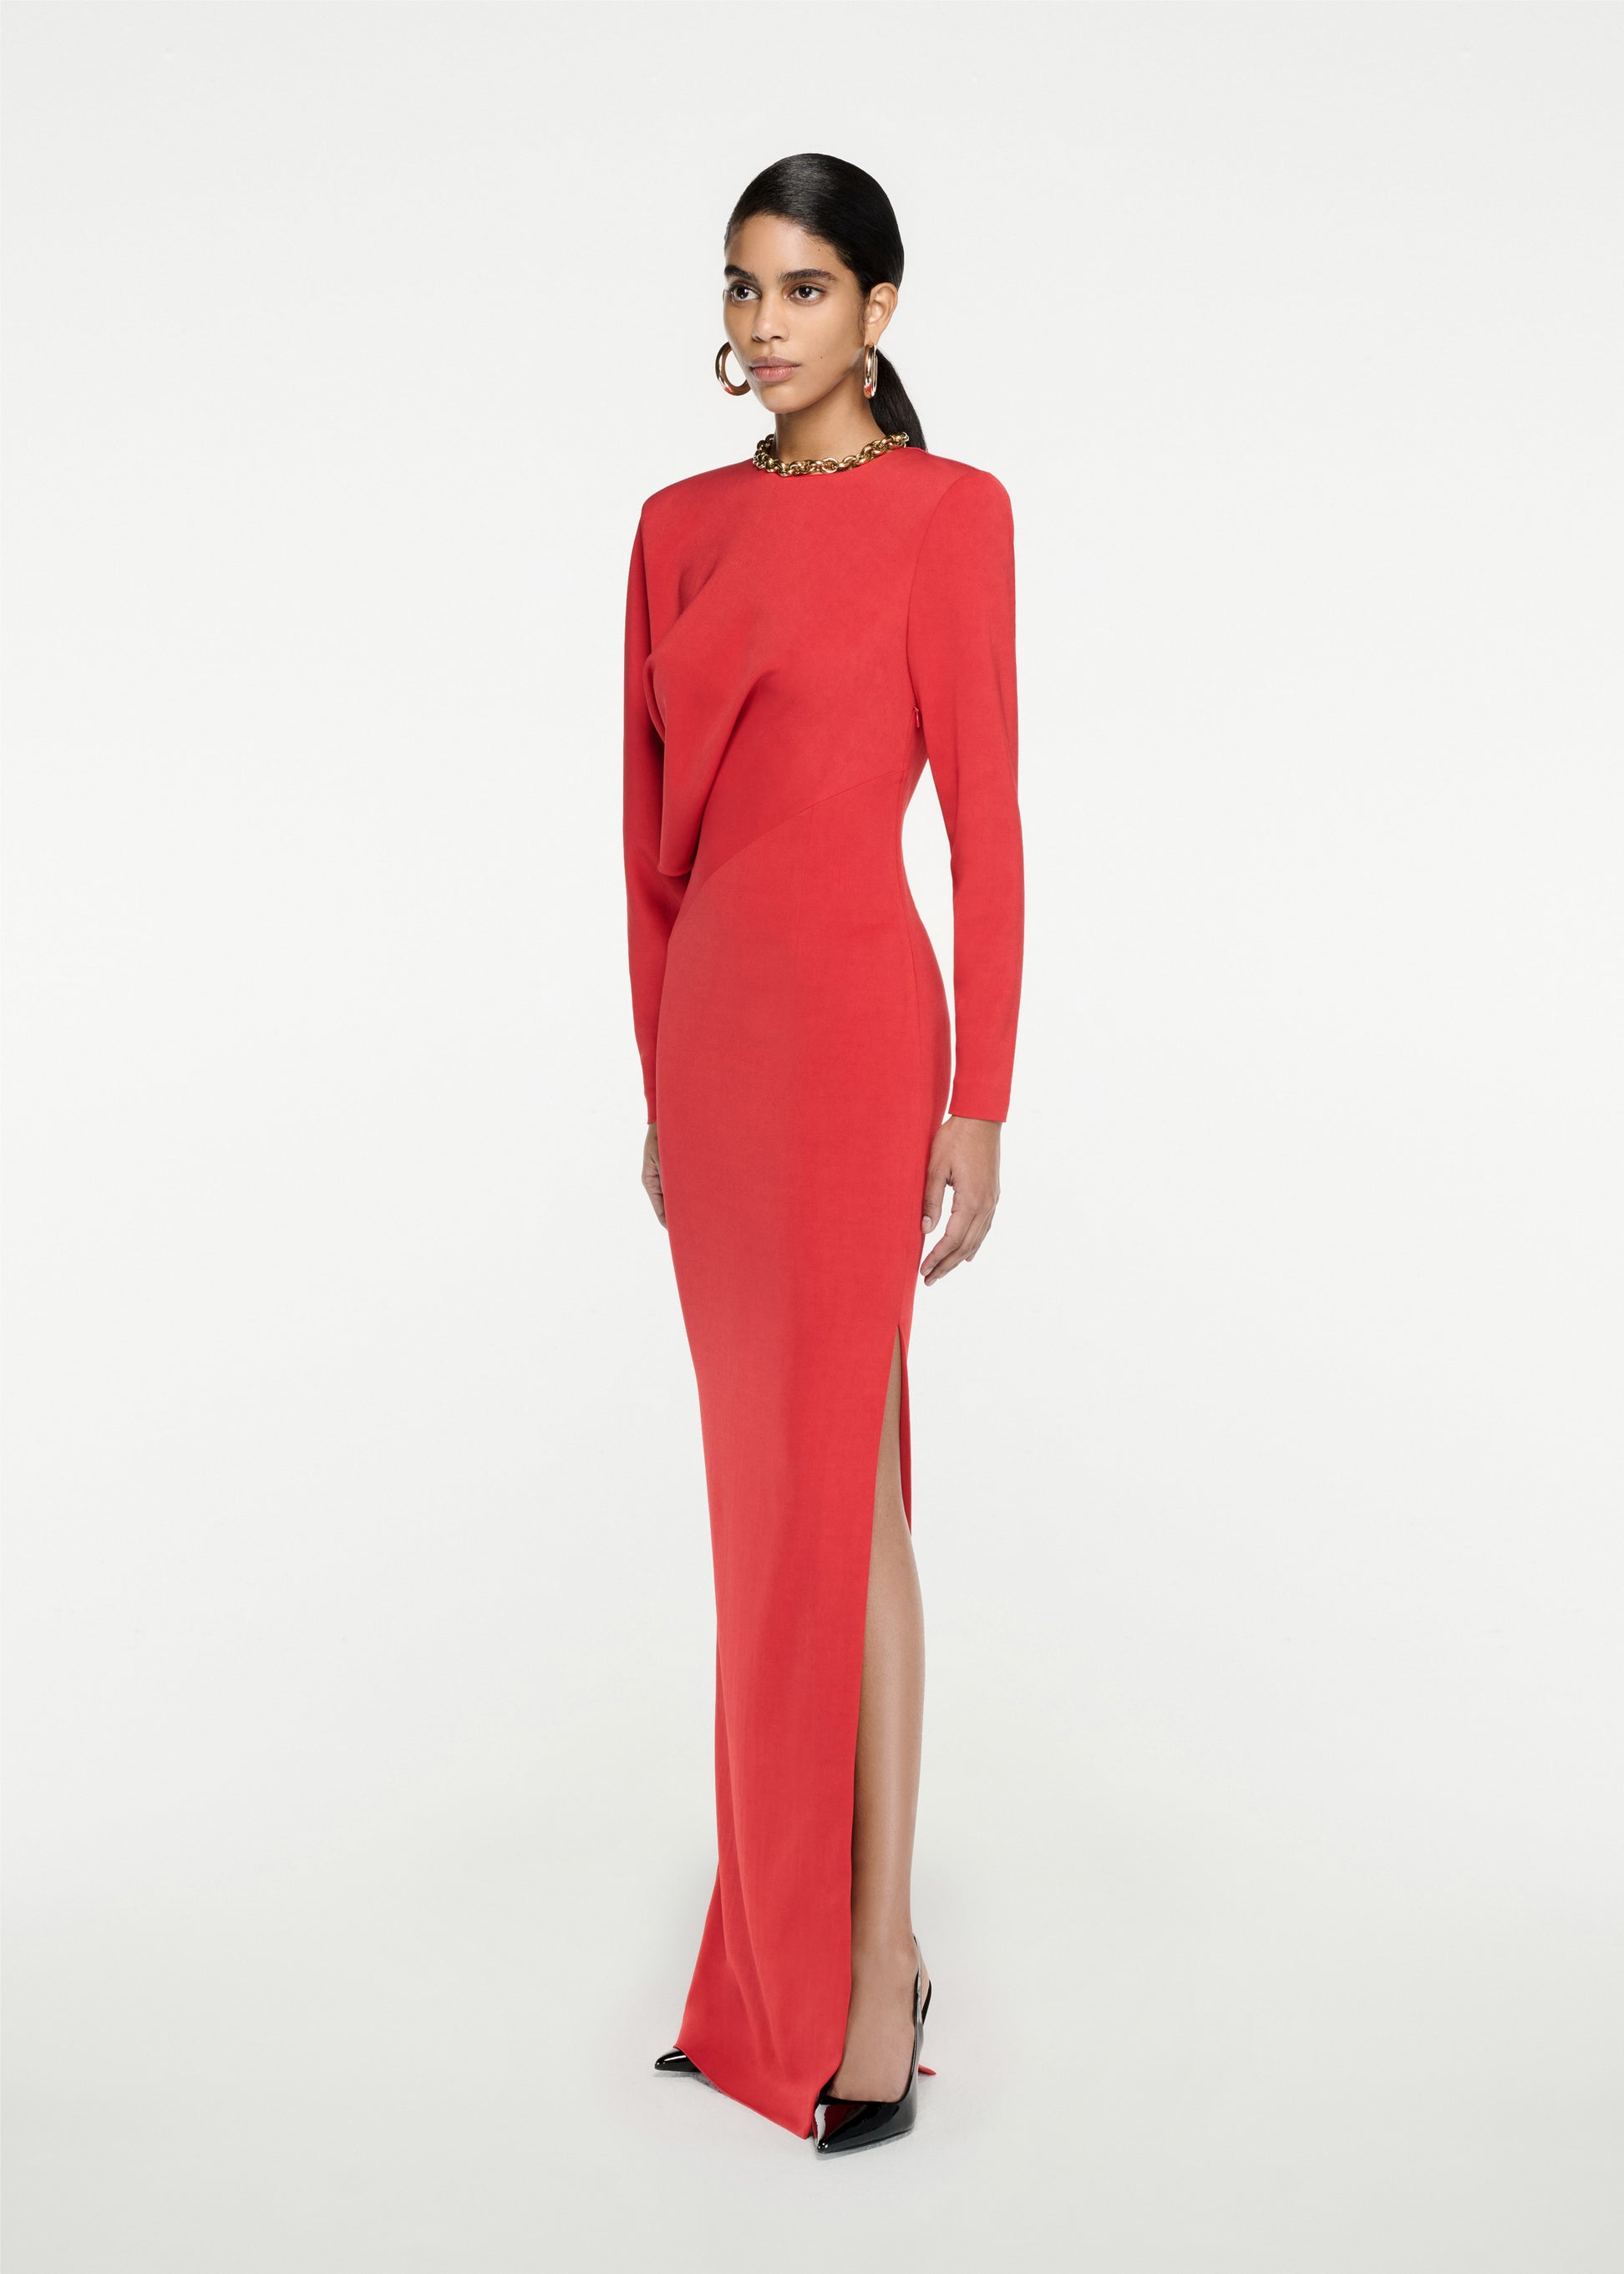 Woman wearing the Long Sleeve Stretch Cady Maxi Dress in Red